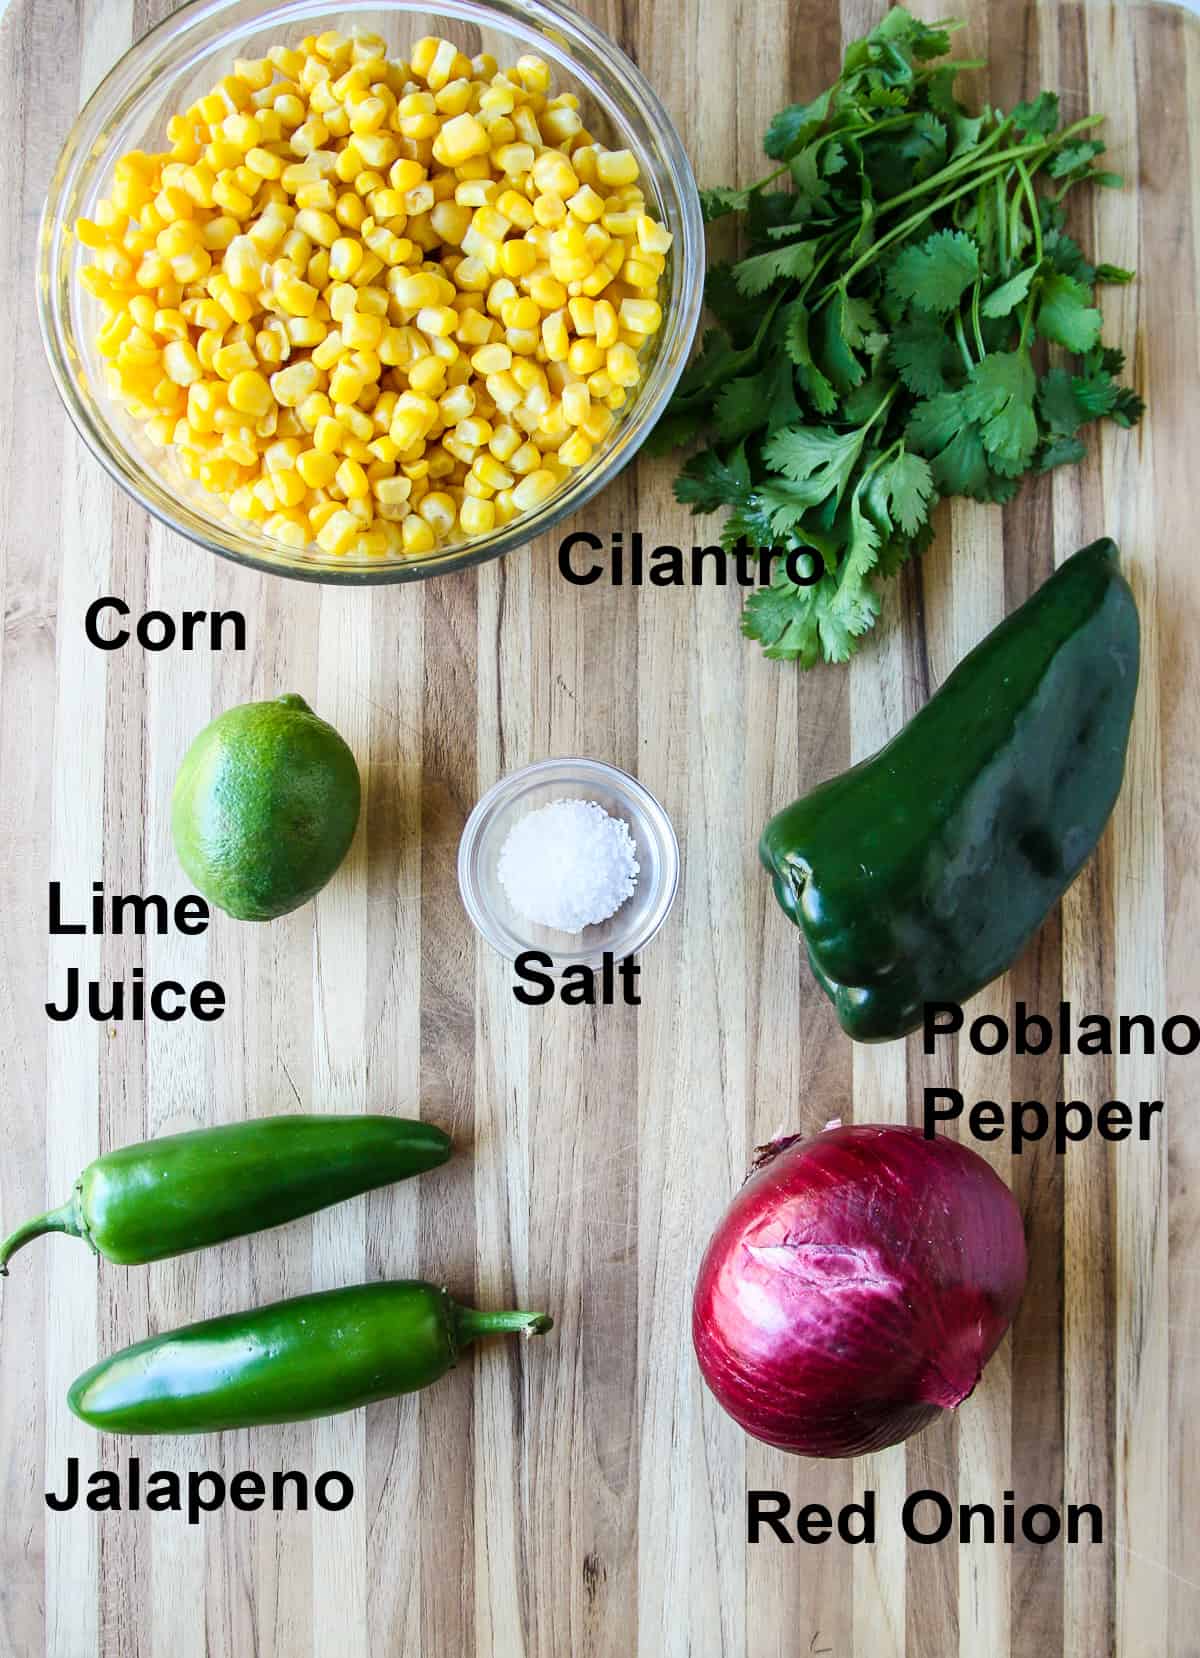 All of the ingredients to make the corn salsa on a wooden board.